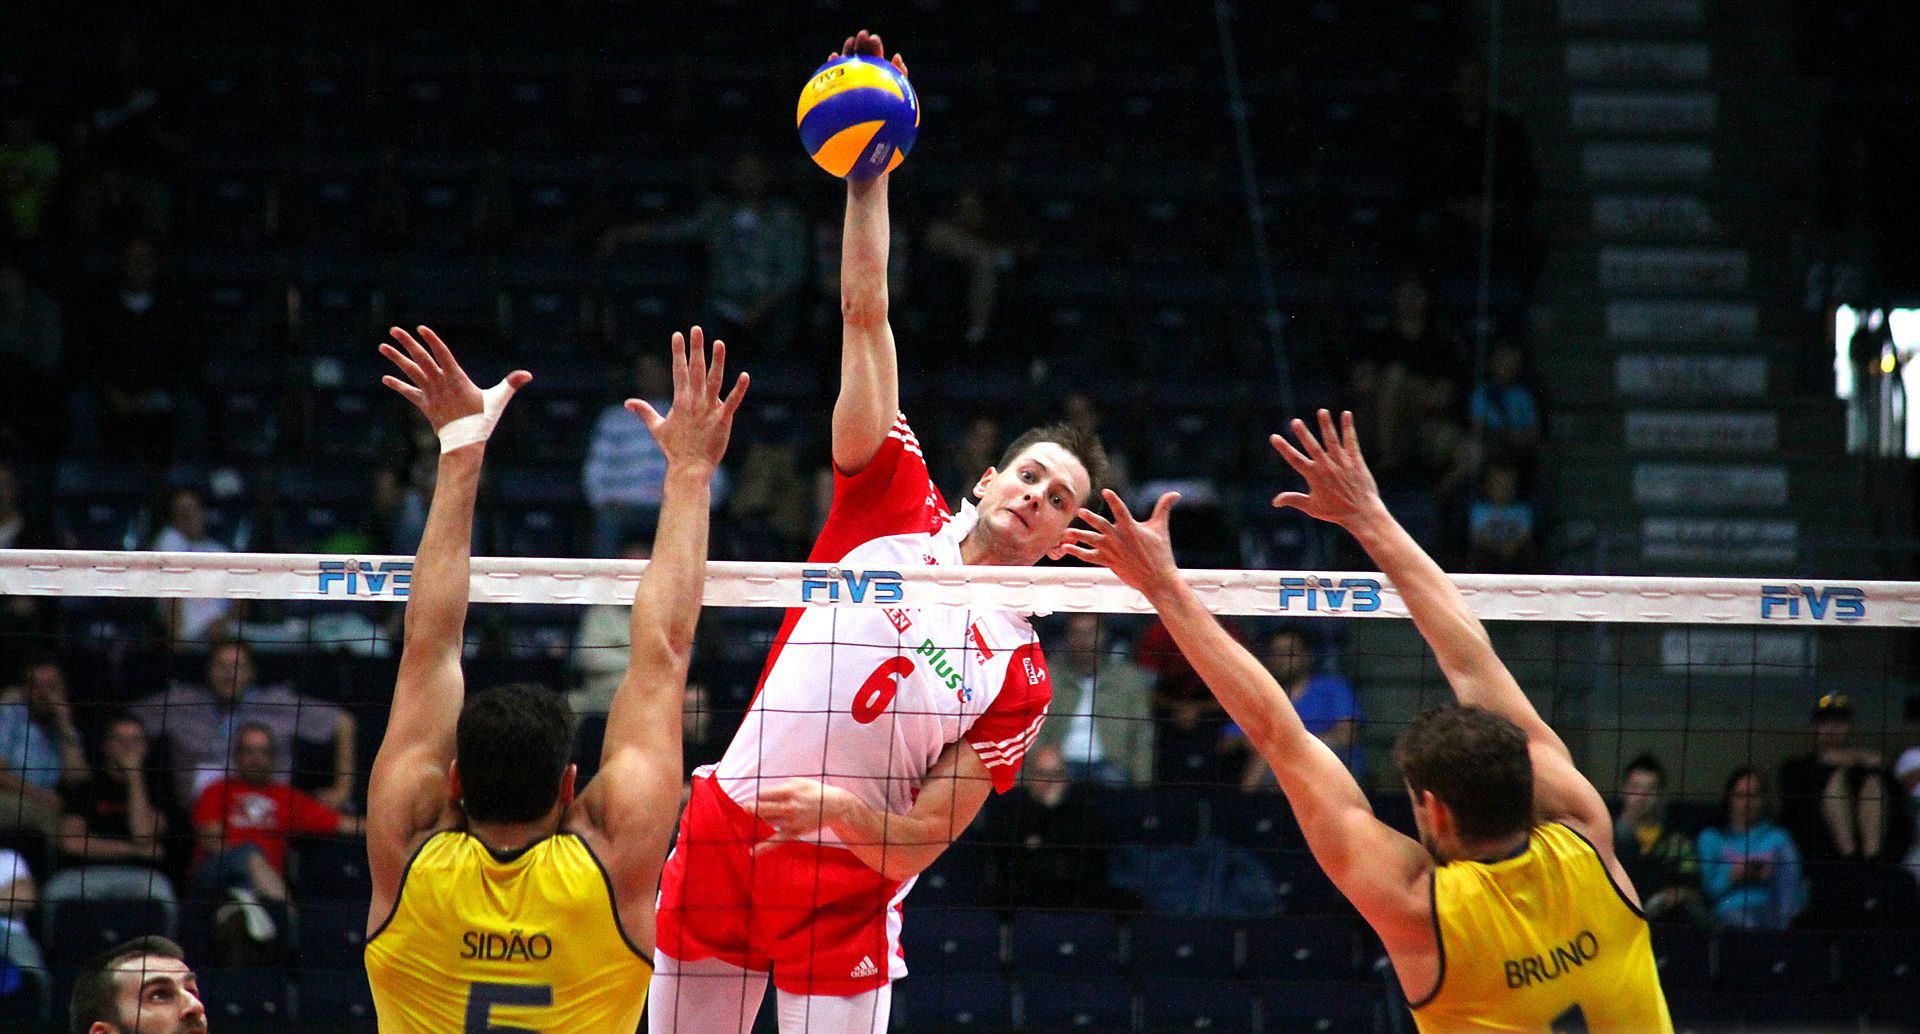 Player Hitting A Volleyball